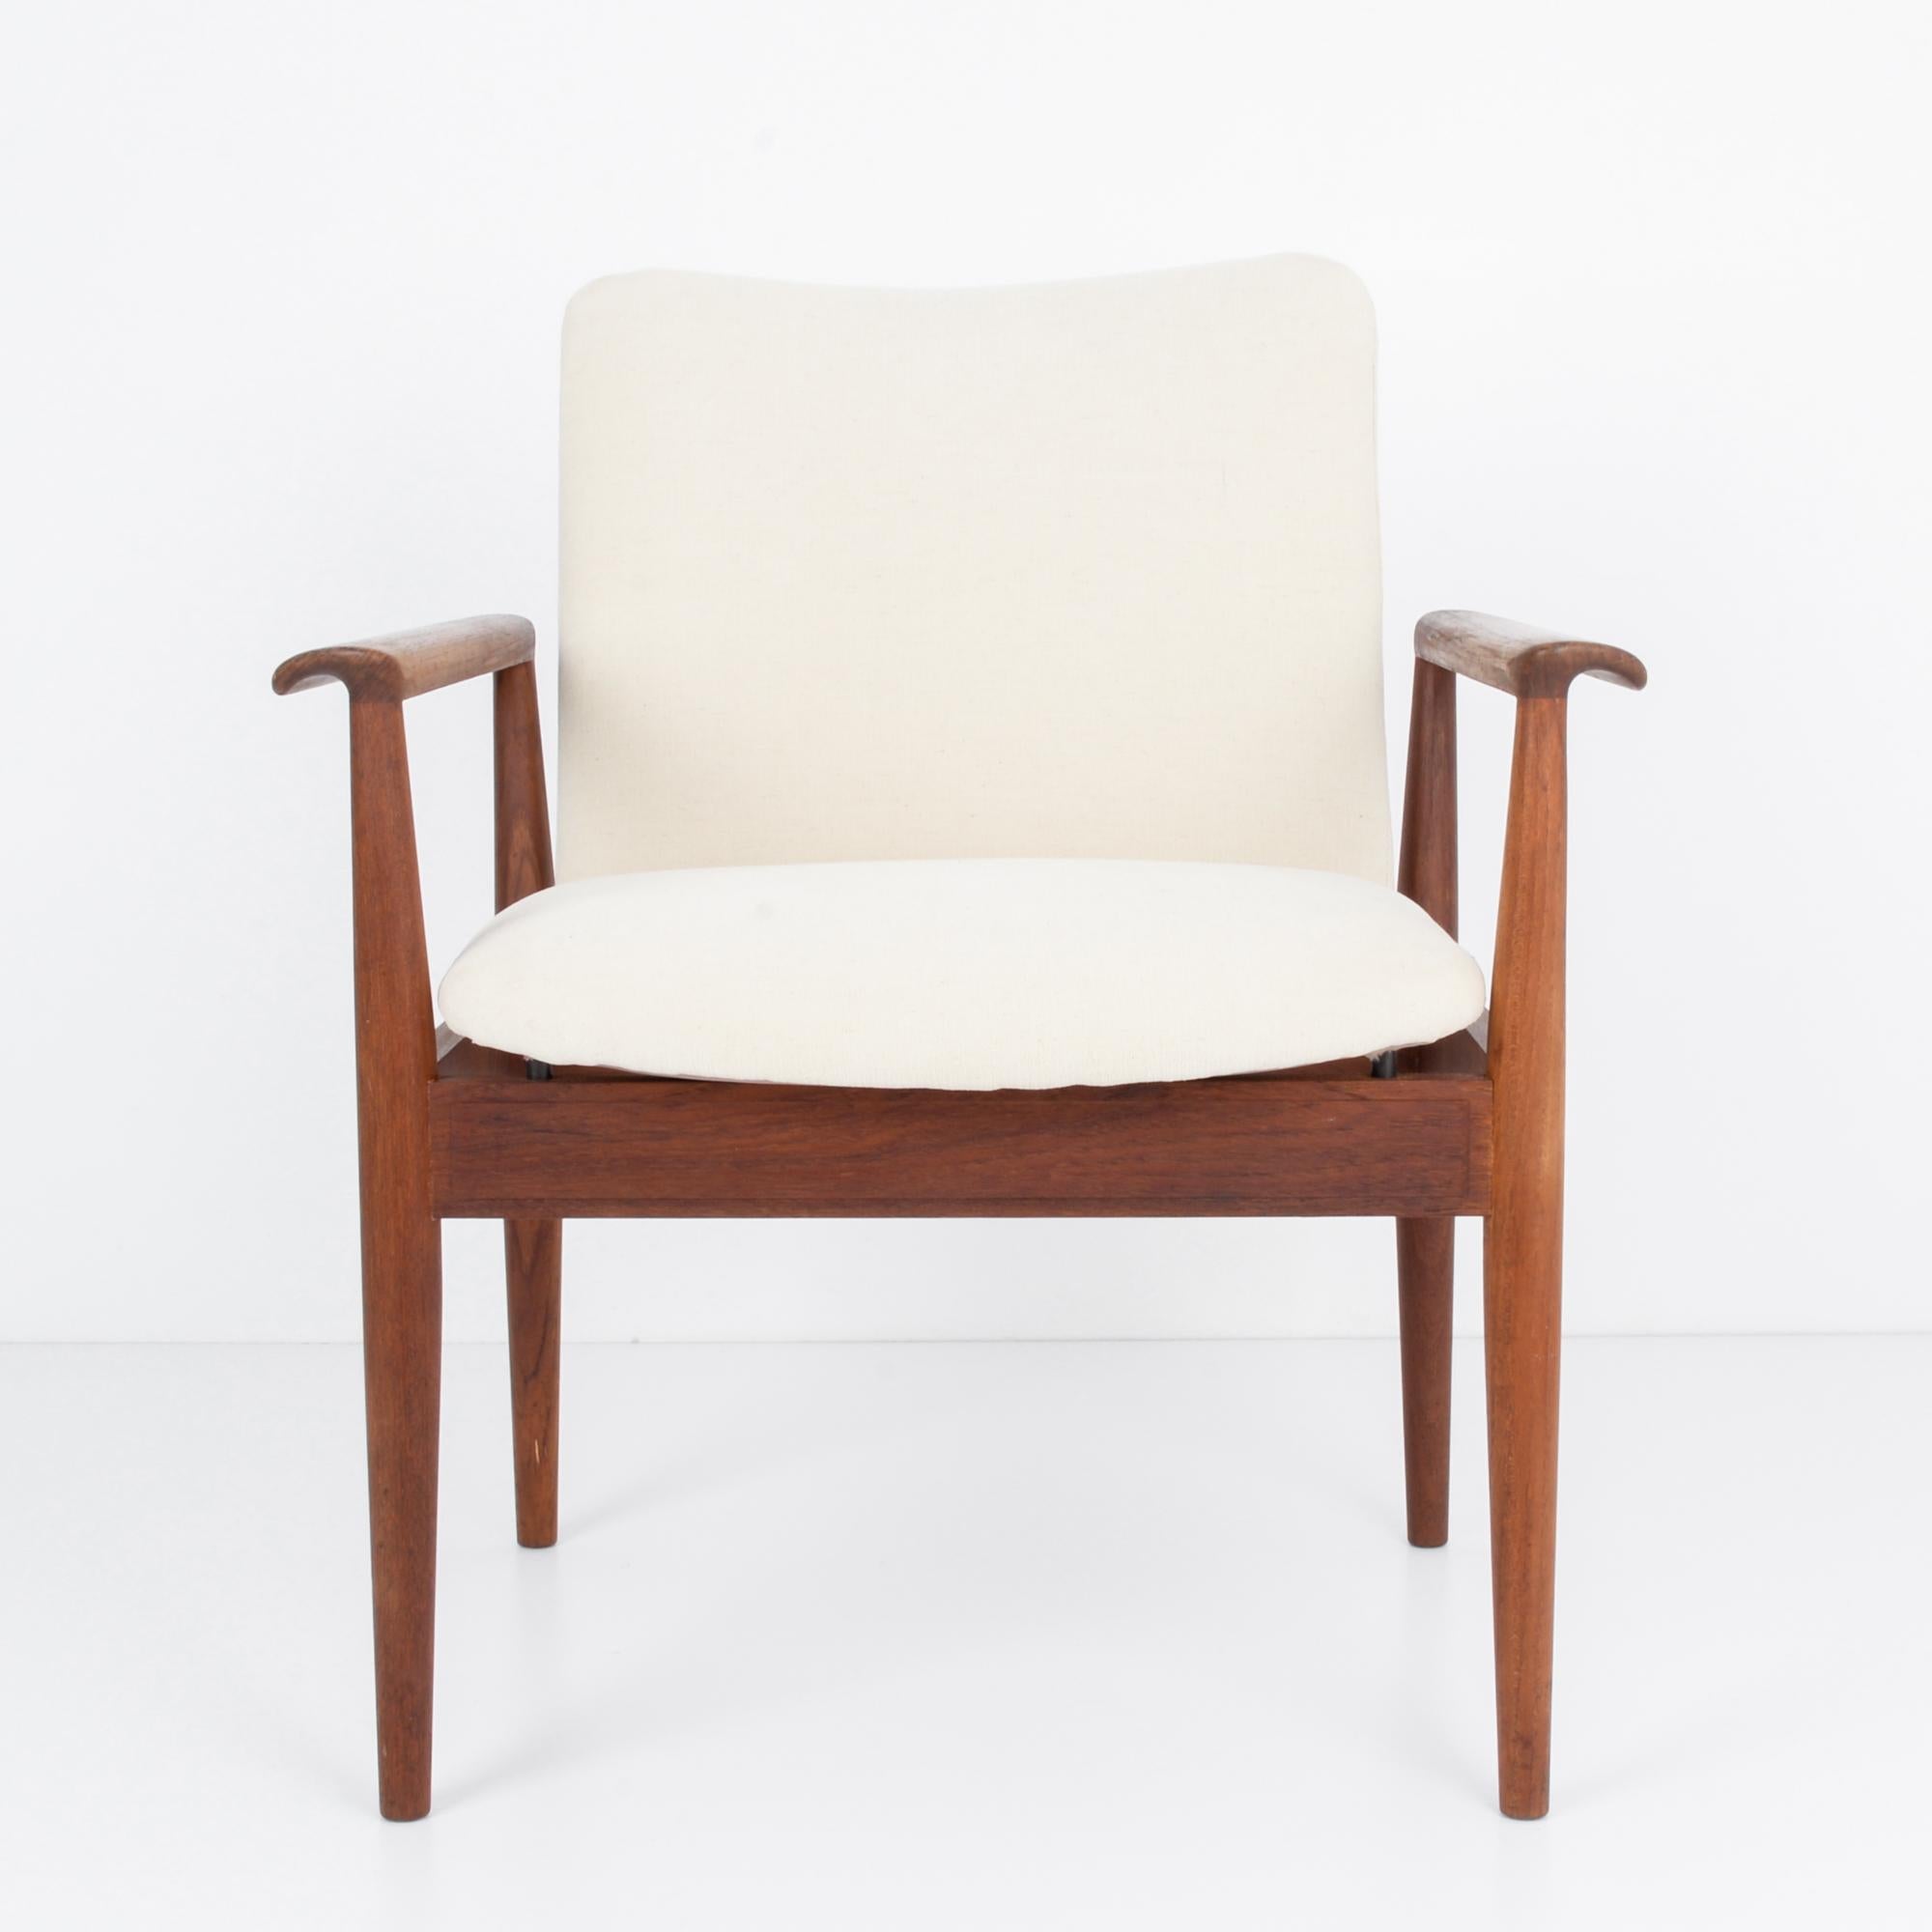 A wooden armchair from Denmark with upholstered seat and back, circa 1960. A chic seat, perfectly calibrated to facilitate conversation and silent contemplation, following design principles of Scandinavian Modernism. Timeless and sophisticated, this